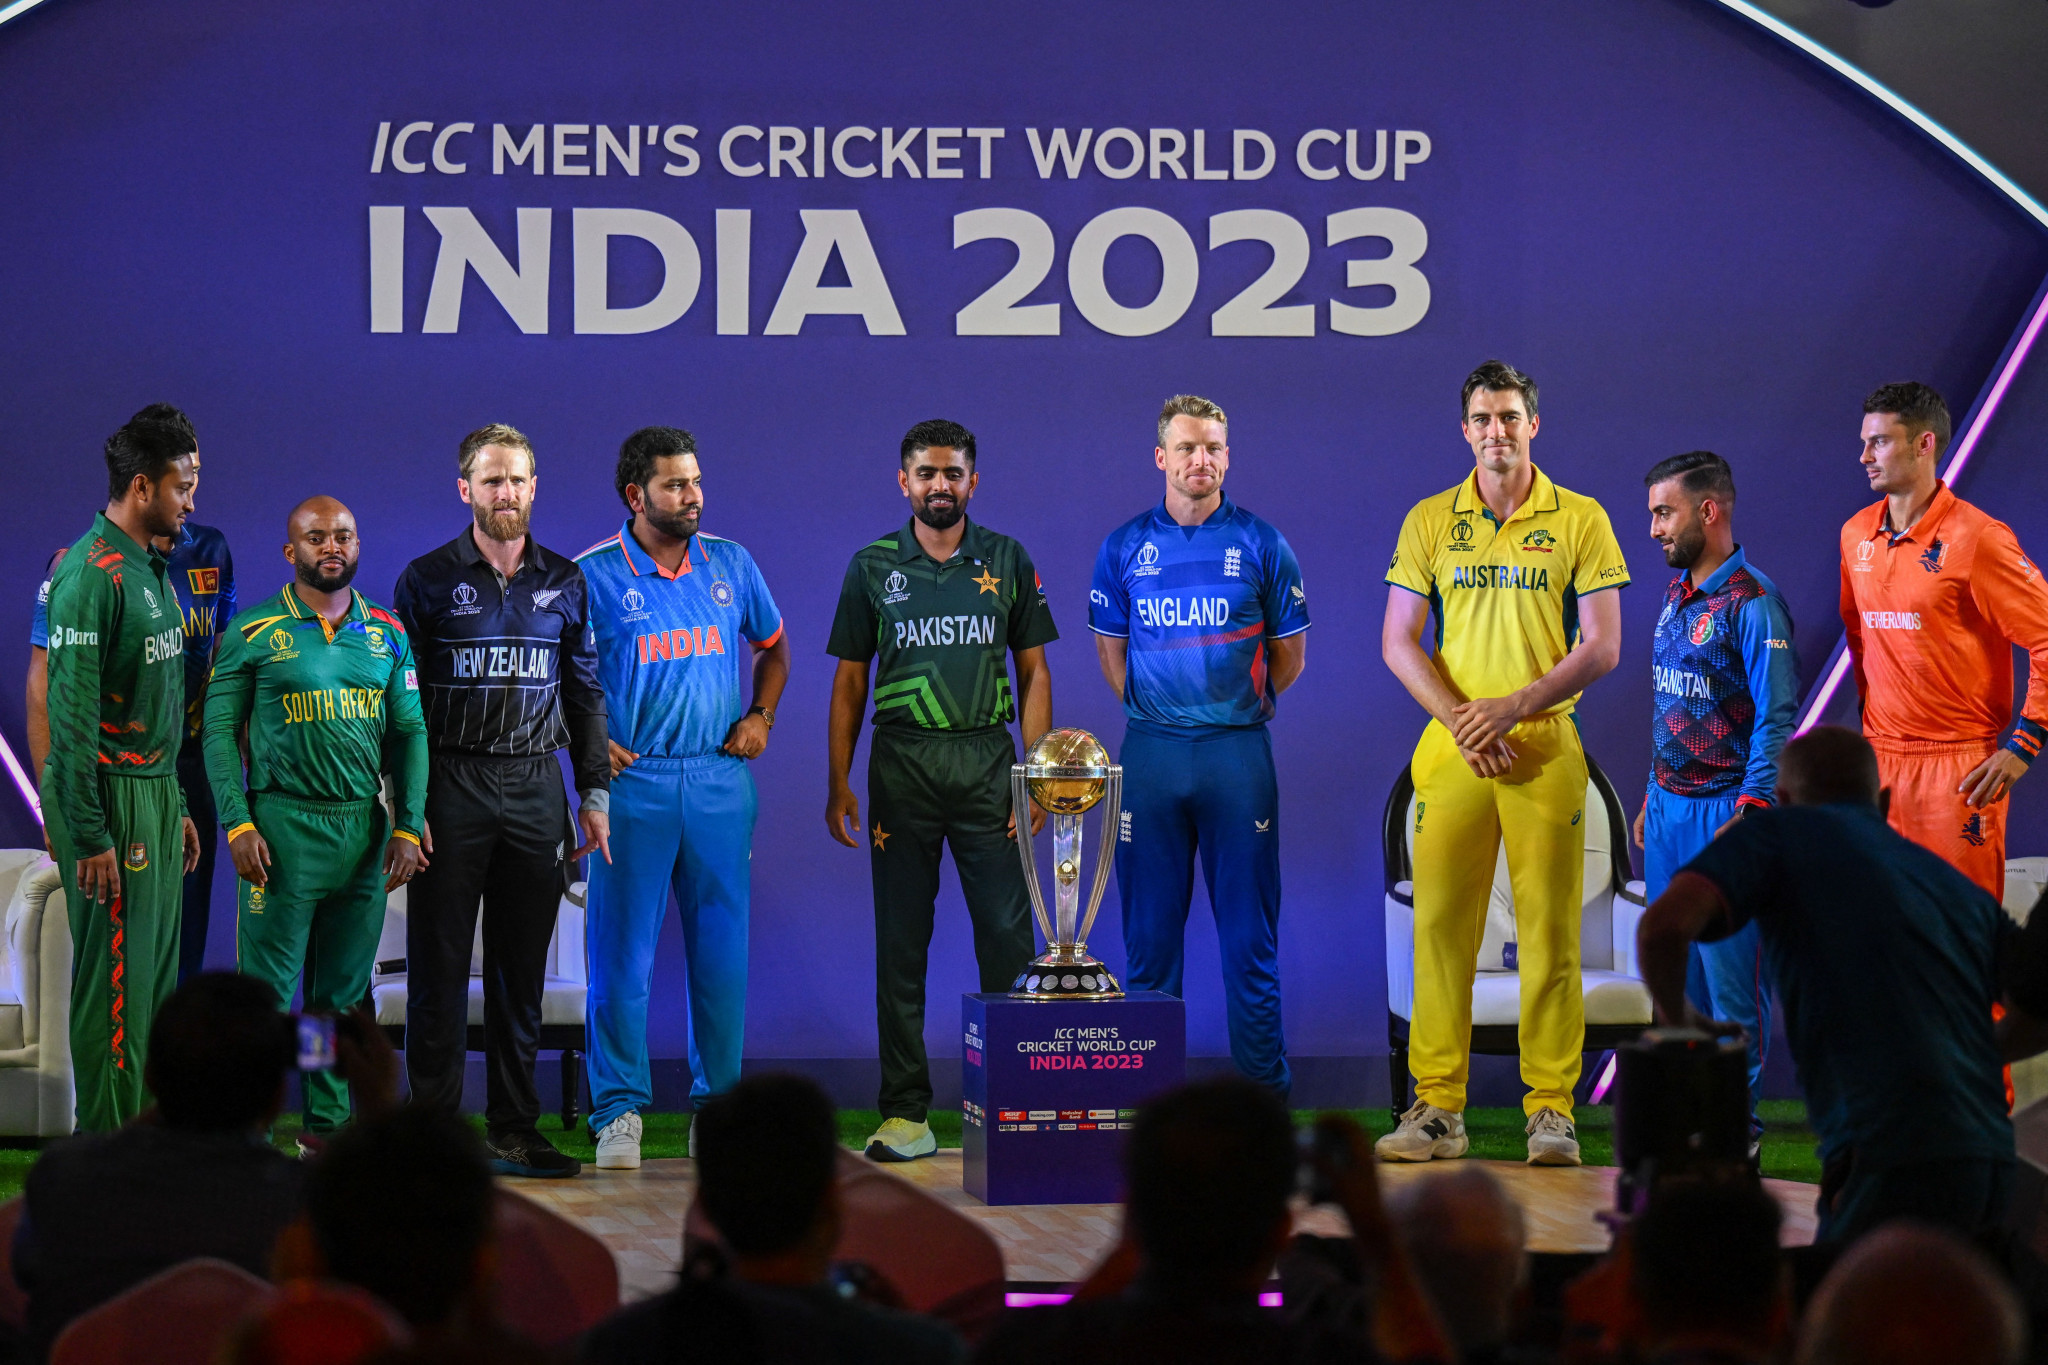 ICC Men's Cricket World Cup set to open in India with rematch of 2019 final between England and New Zealand